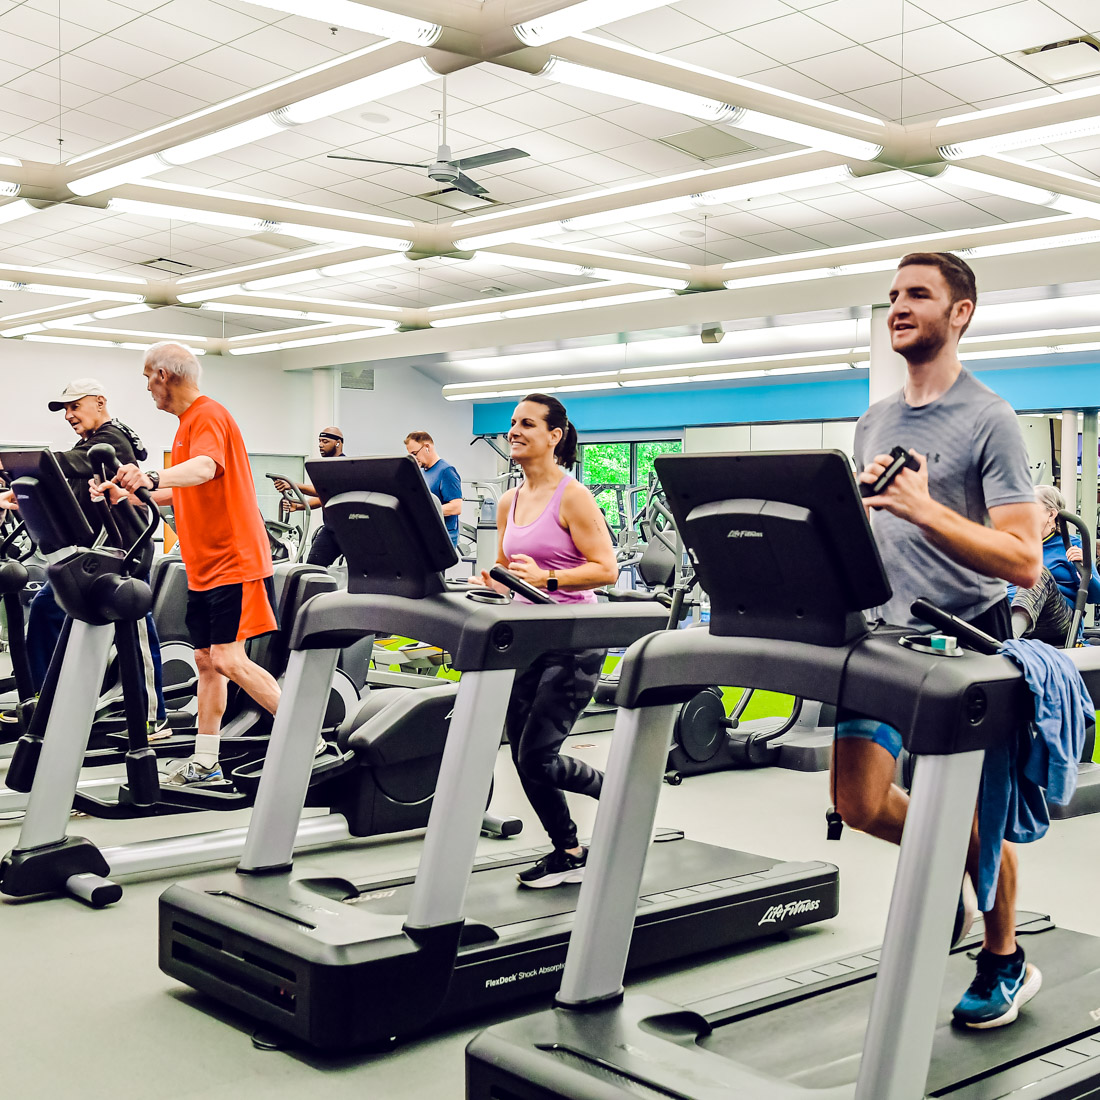 People running on treadmills in a fitness center.